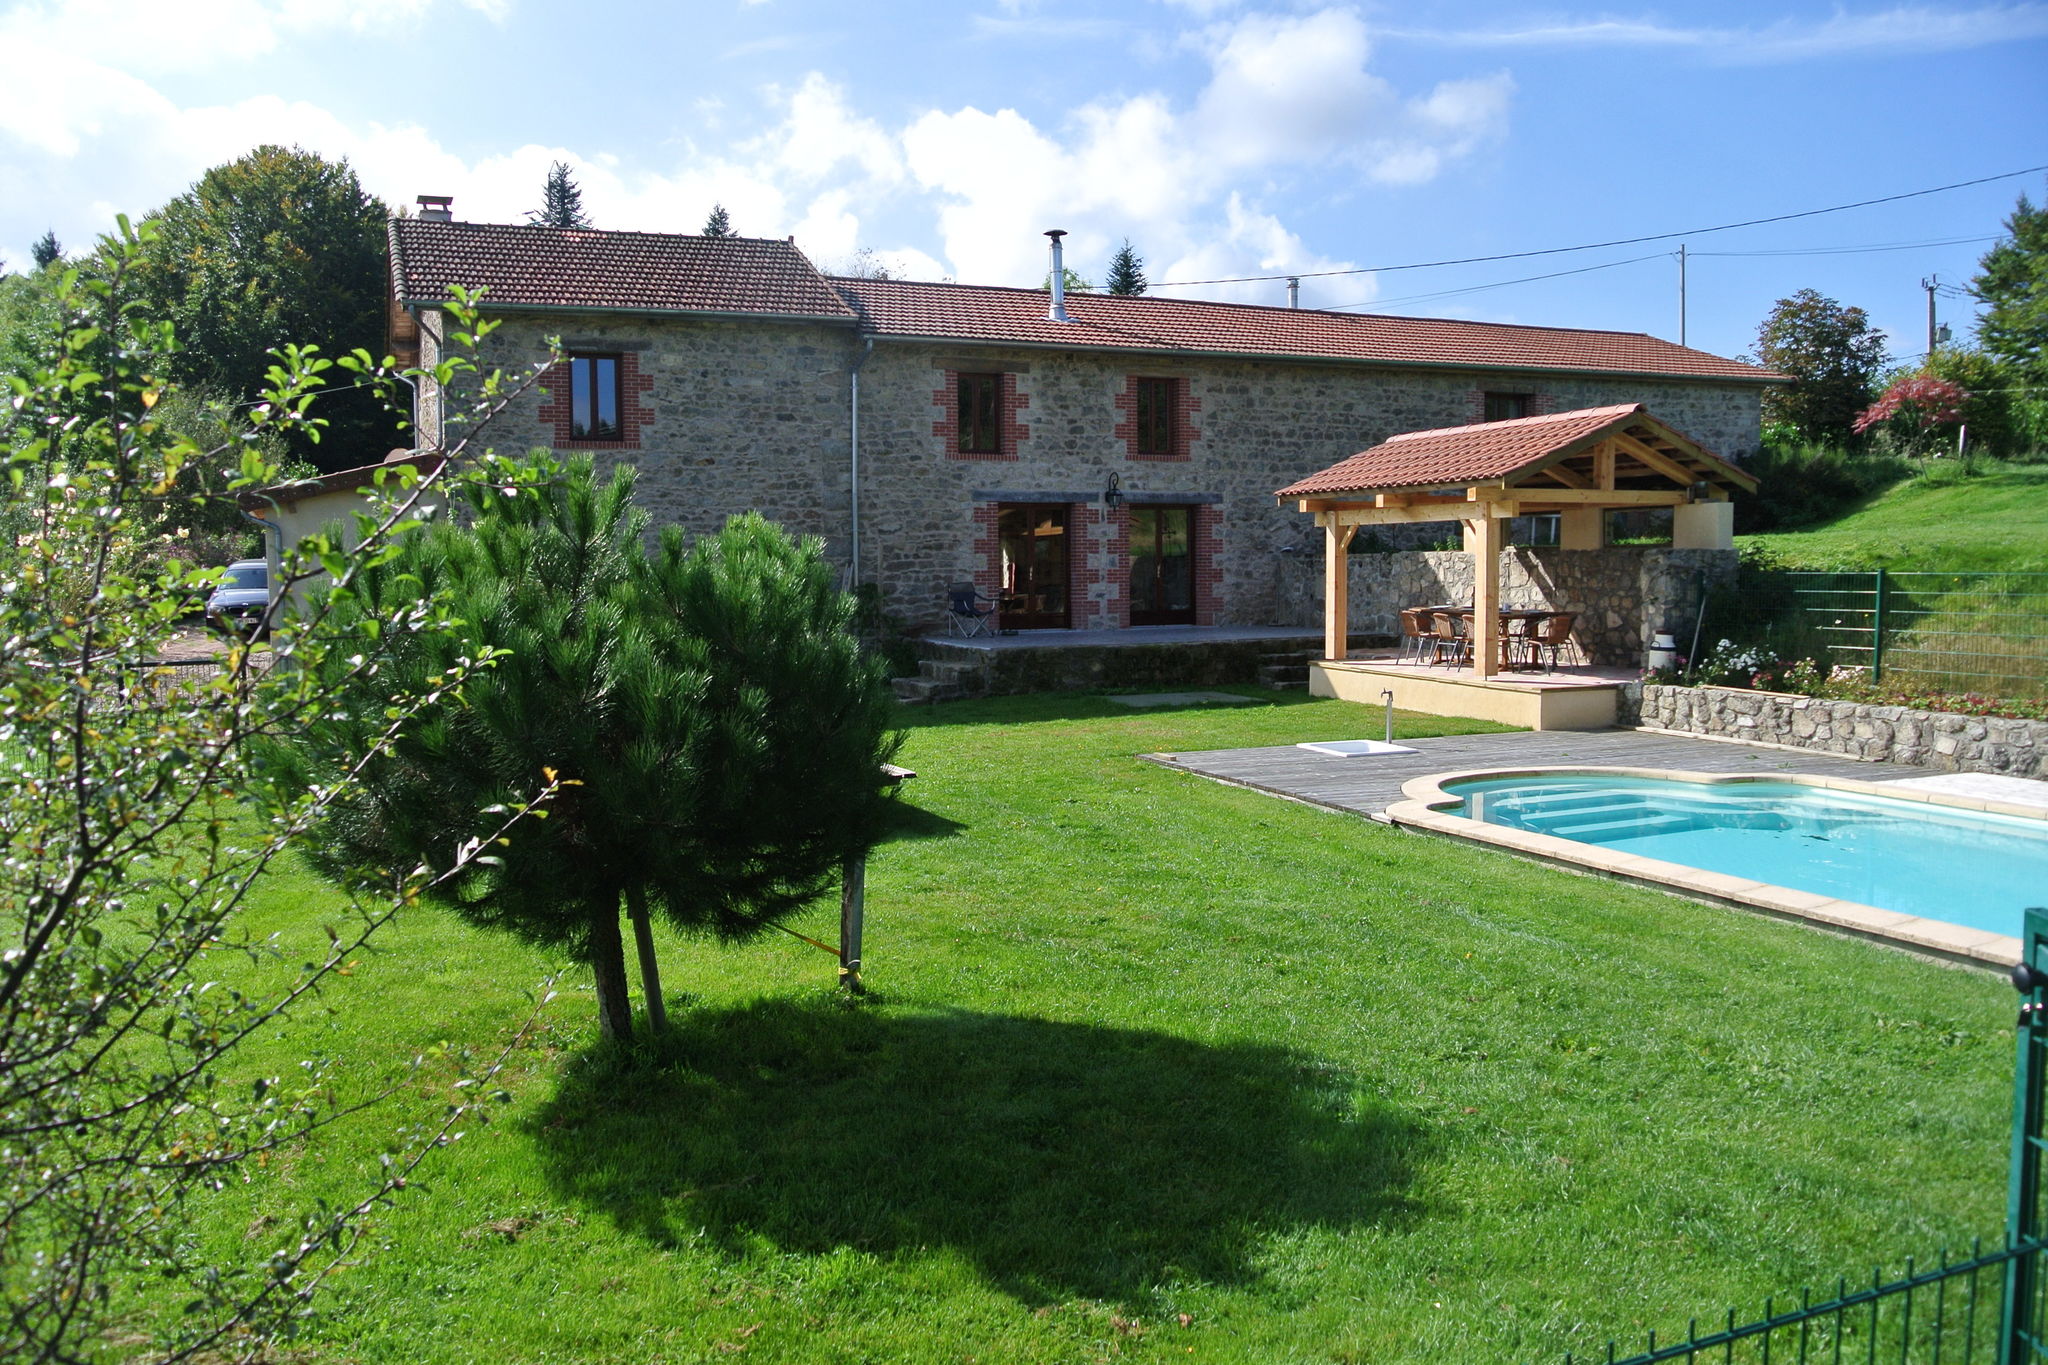 Restored barn in privat domain (3.5 hectares) with pool and 2 lakes